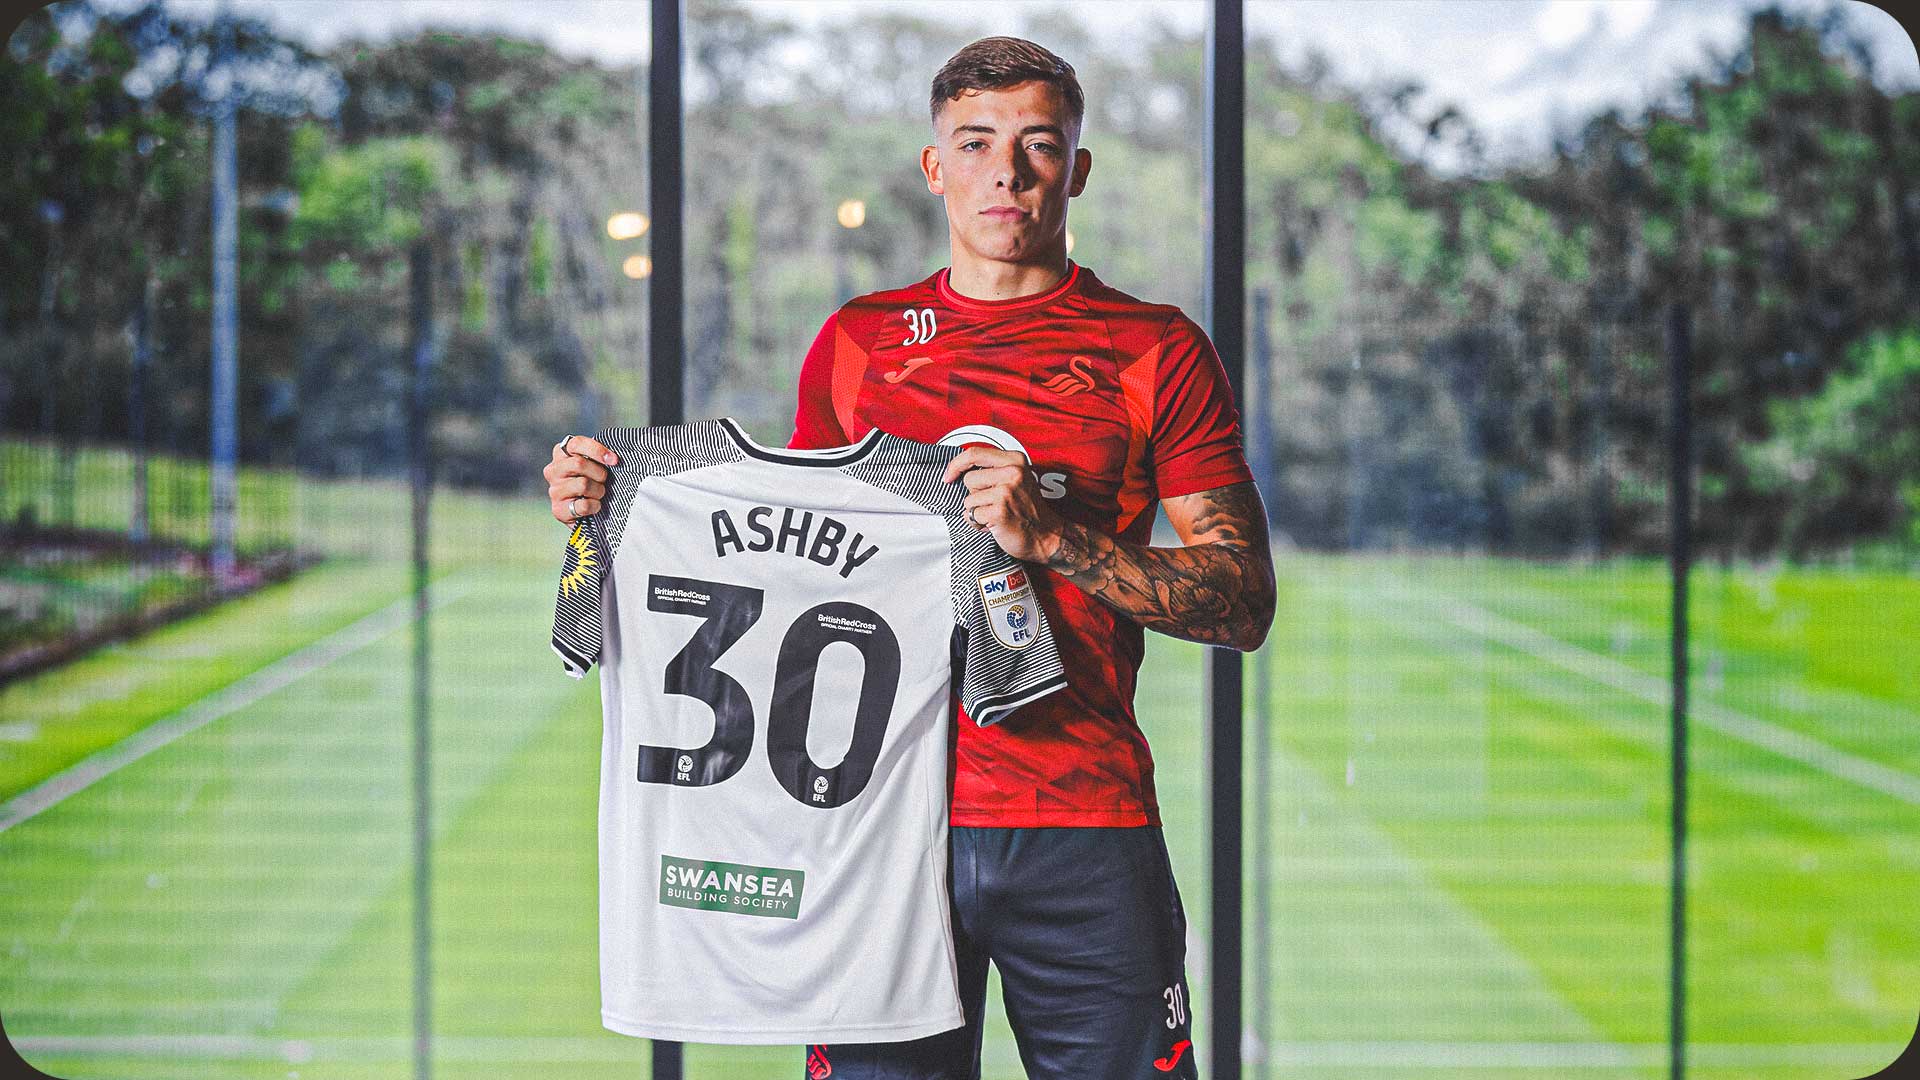 Photograph of Harrison Ashby holding the number 30 shirt.